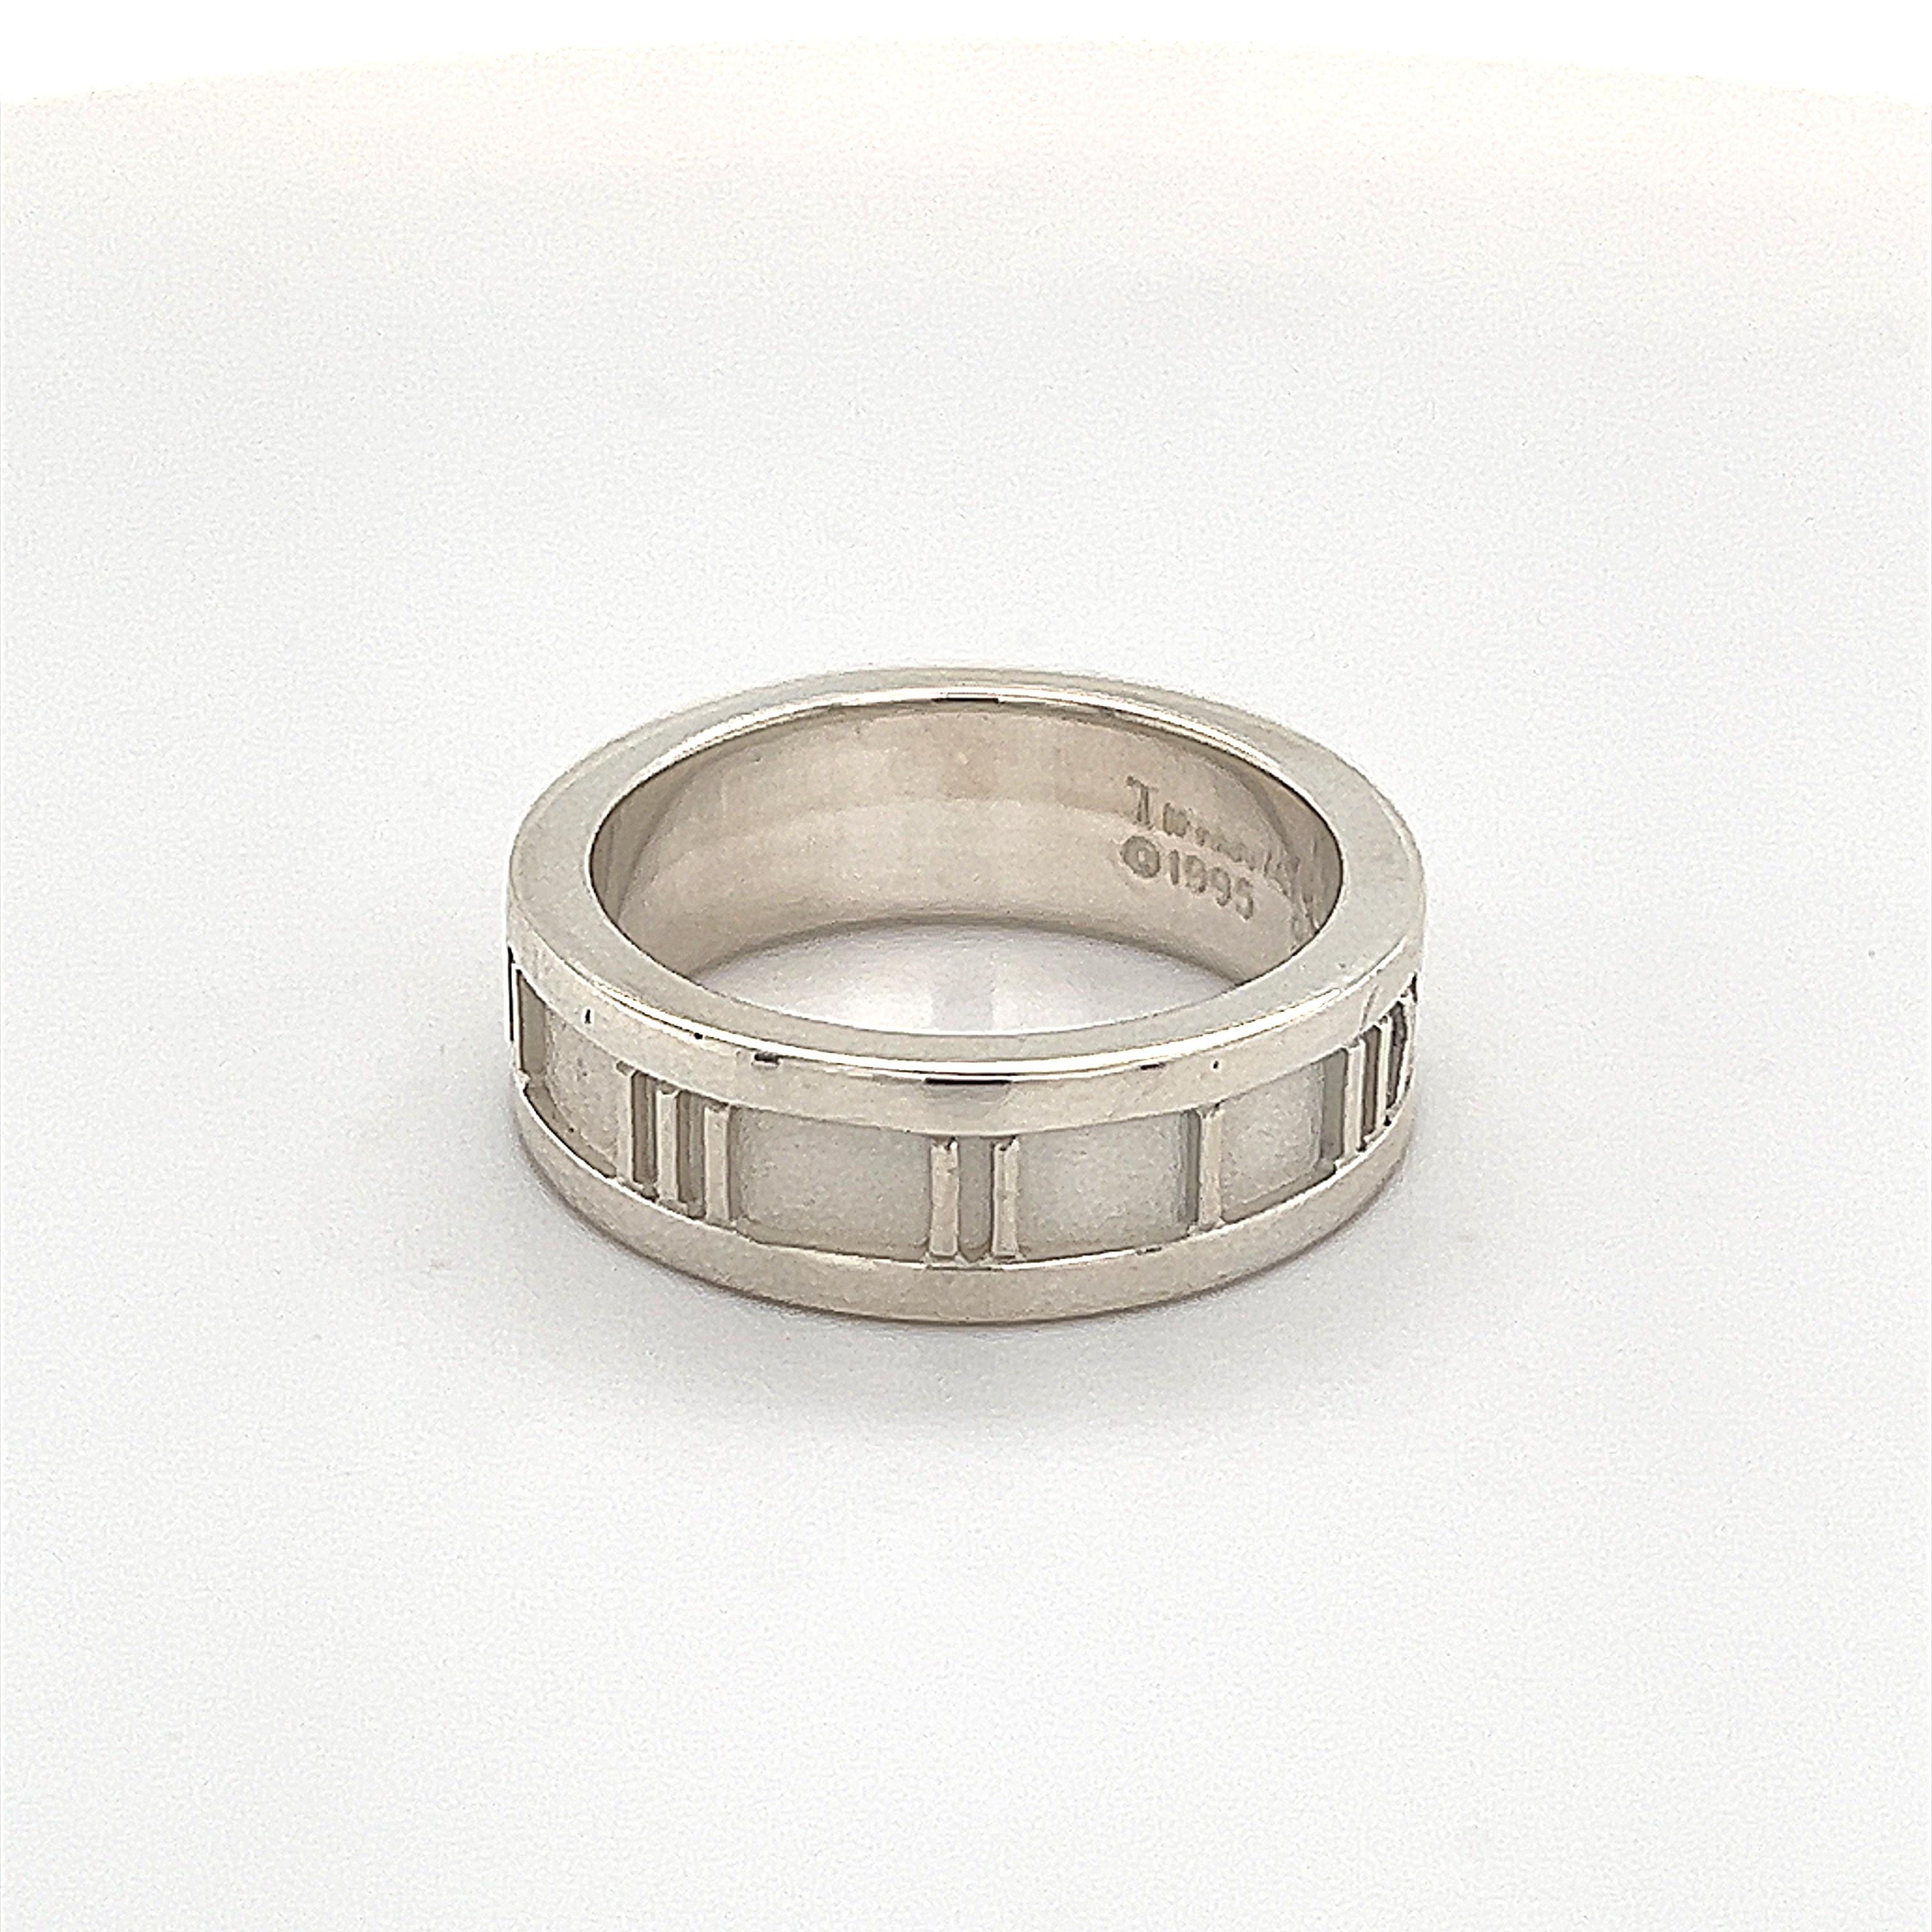 Tiffany & Co Estate Atlas Ring Size 4 Sterling Silver 6 MM Height TIF214


TRUSTED SELLER SINCE 2002

PLEASE SEE OUR HUNDREDS OF POSITIVE FEEDBACKS FROM OUR CLIENTS!!

FREE SHIPPING!!

DETAILS
Ring Size: 4
Height: 6 mm
Weight: 5.3 Grams
Metal: